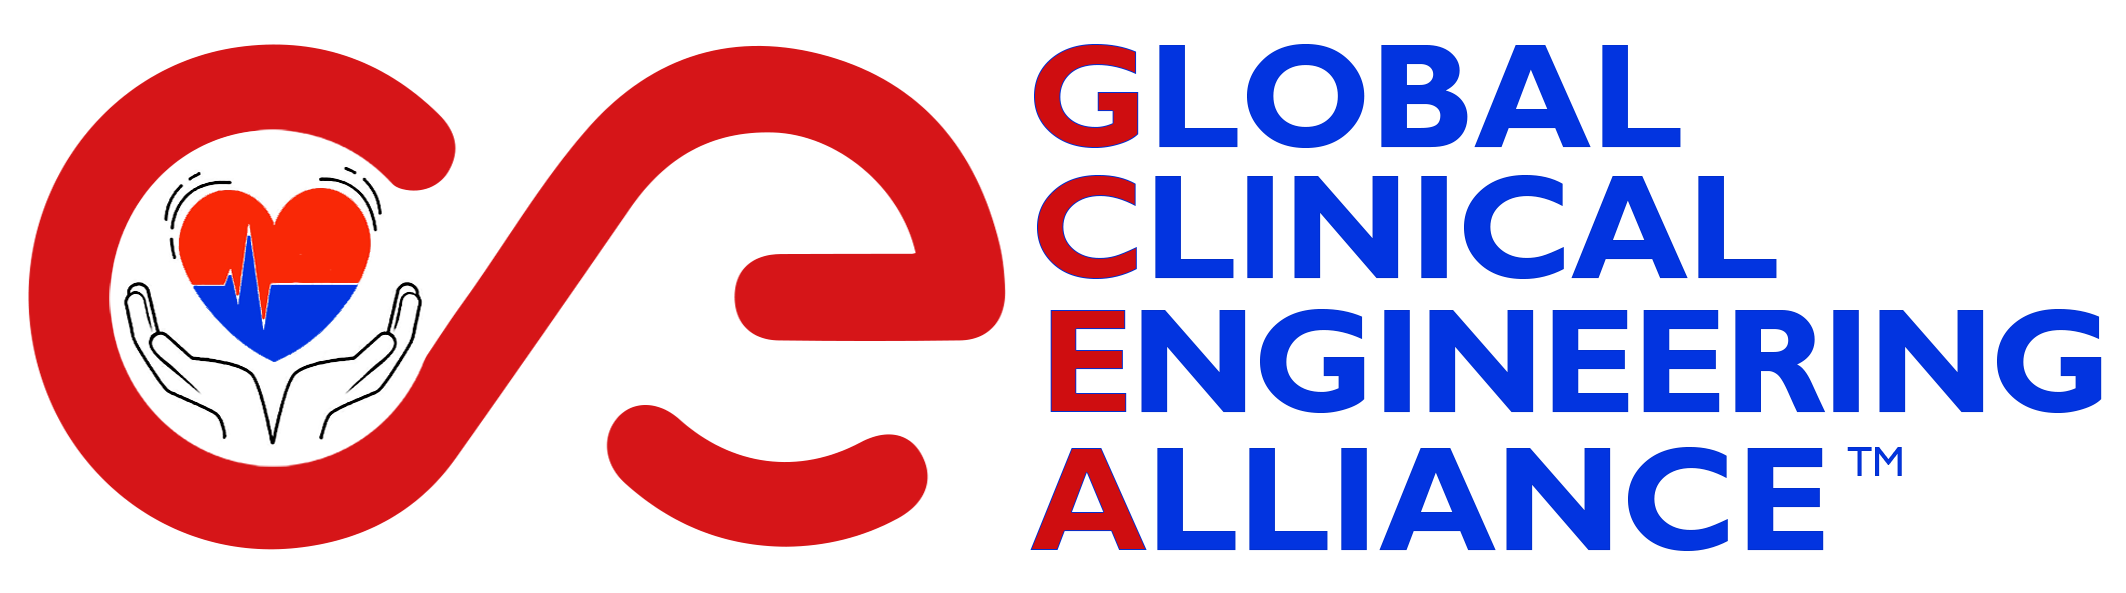 Global Clinical Engineering Alliance